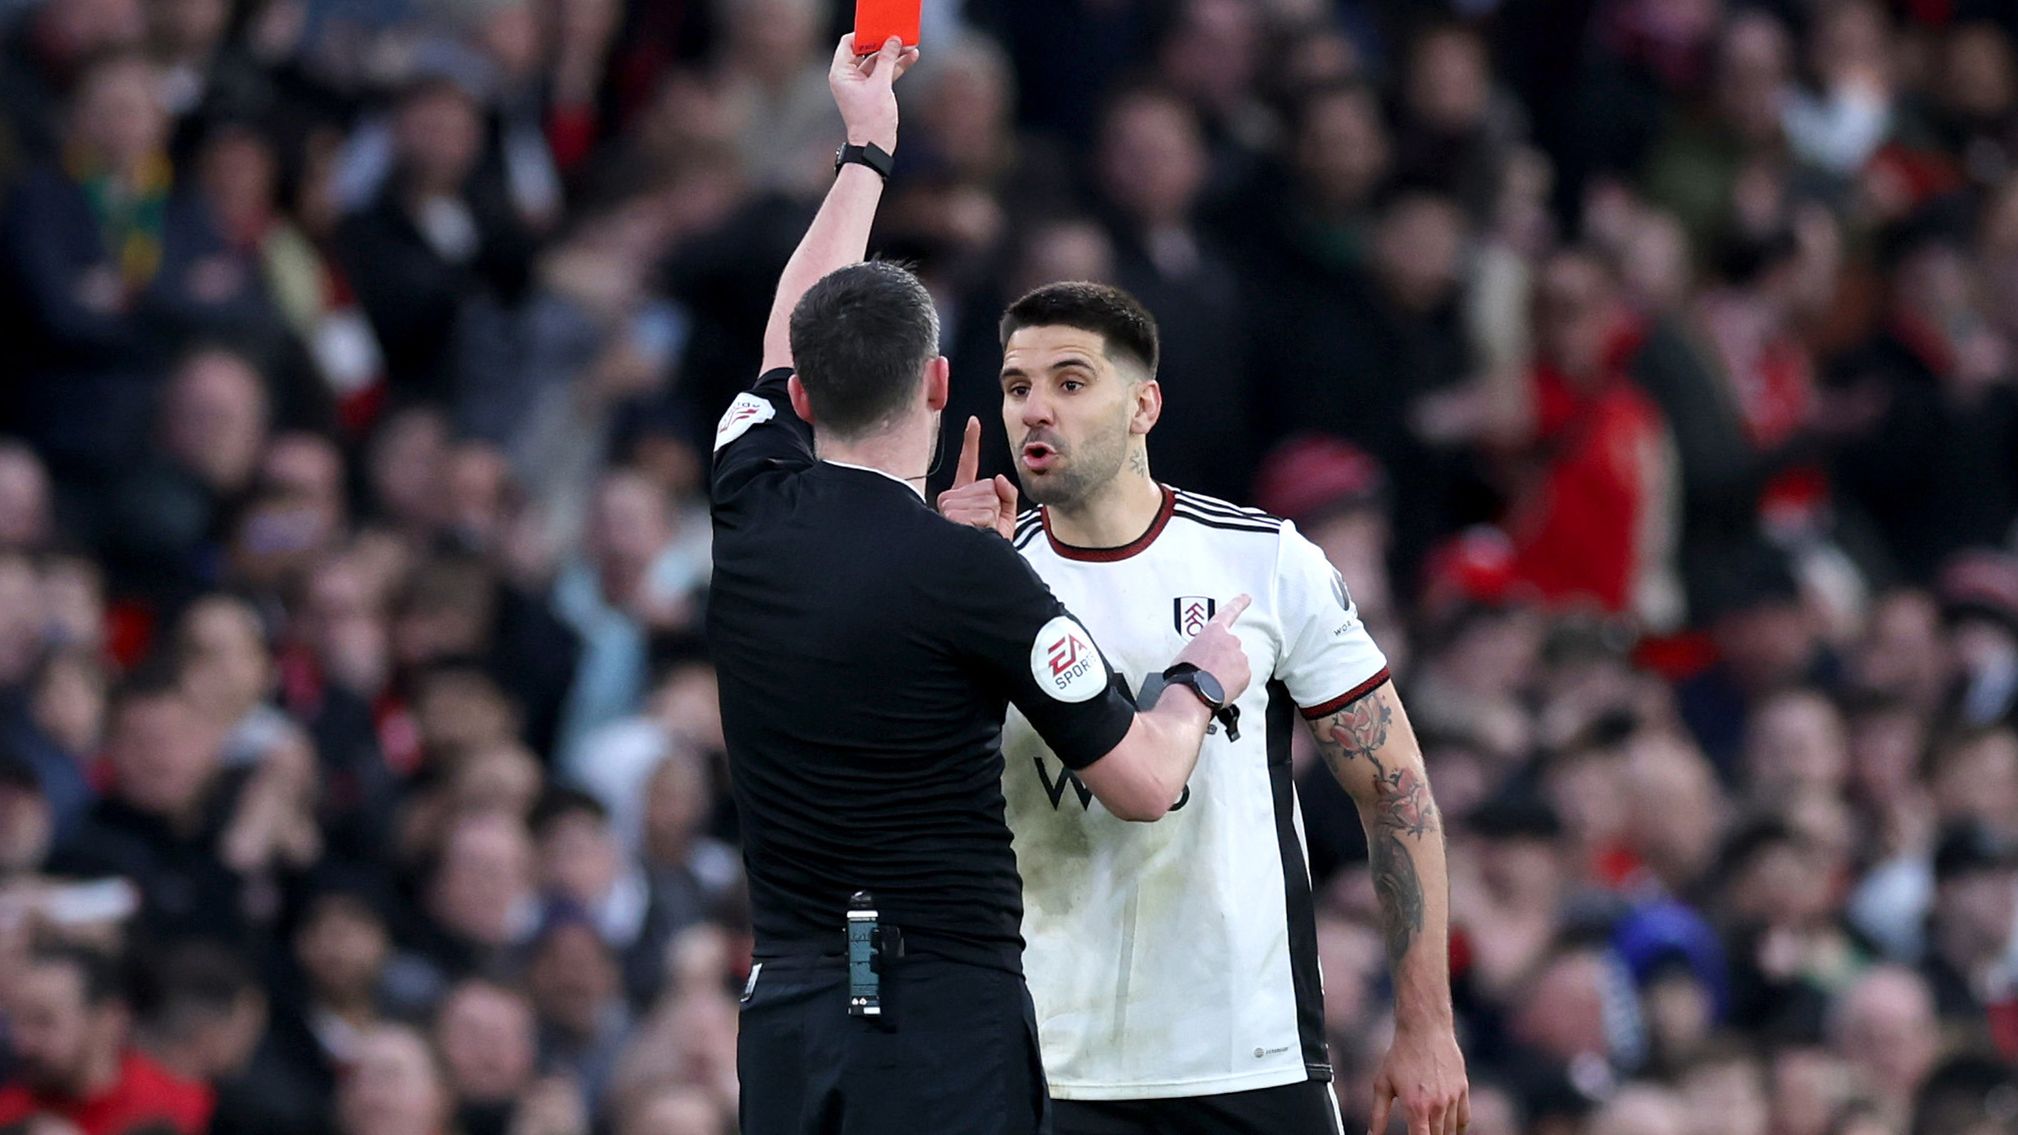 'Clearly insufficient': Fulham striker Aleksandar Mitrovic facing monster ban after red card farce